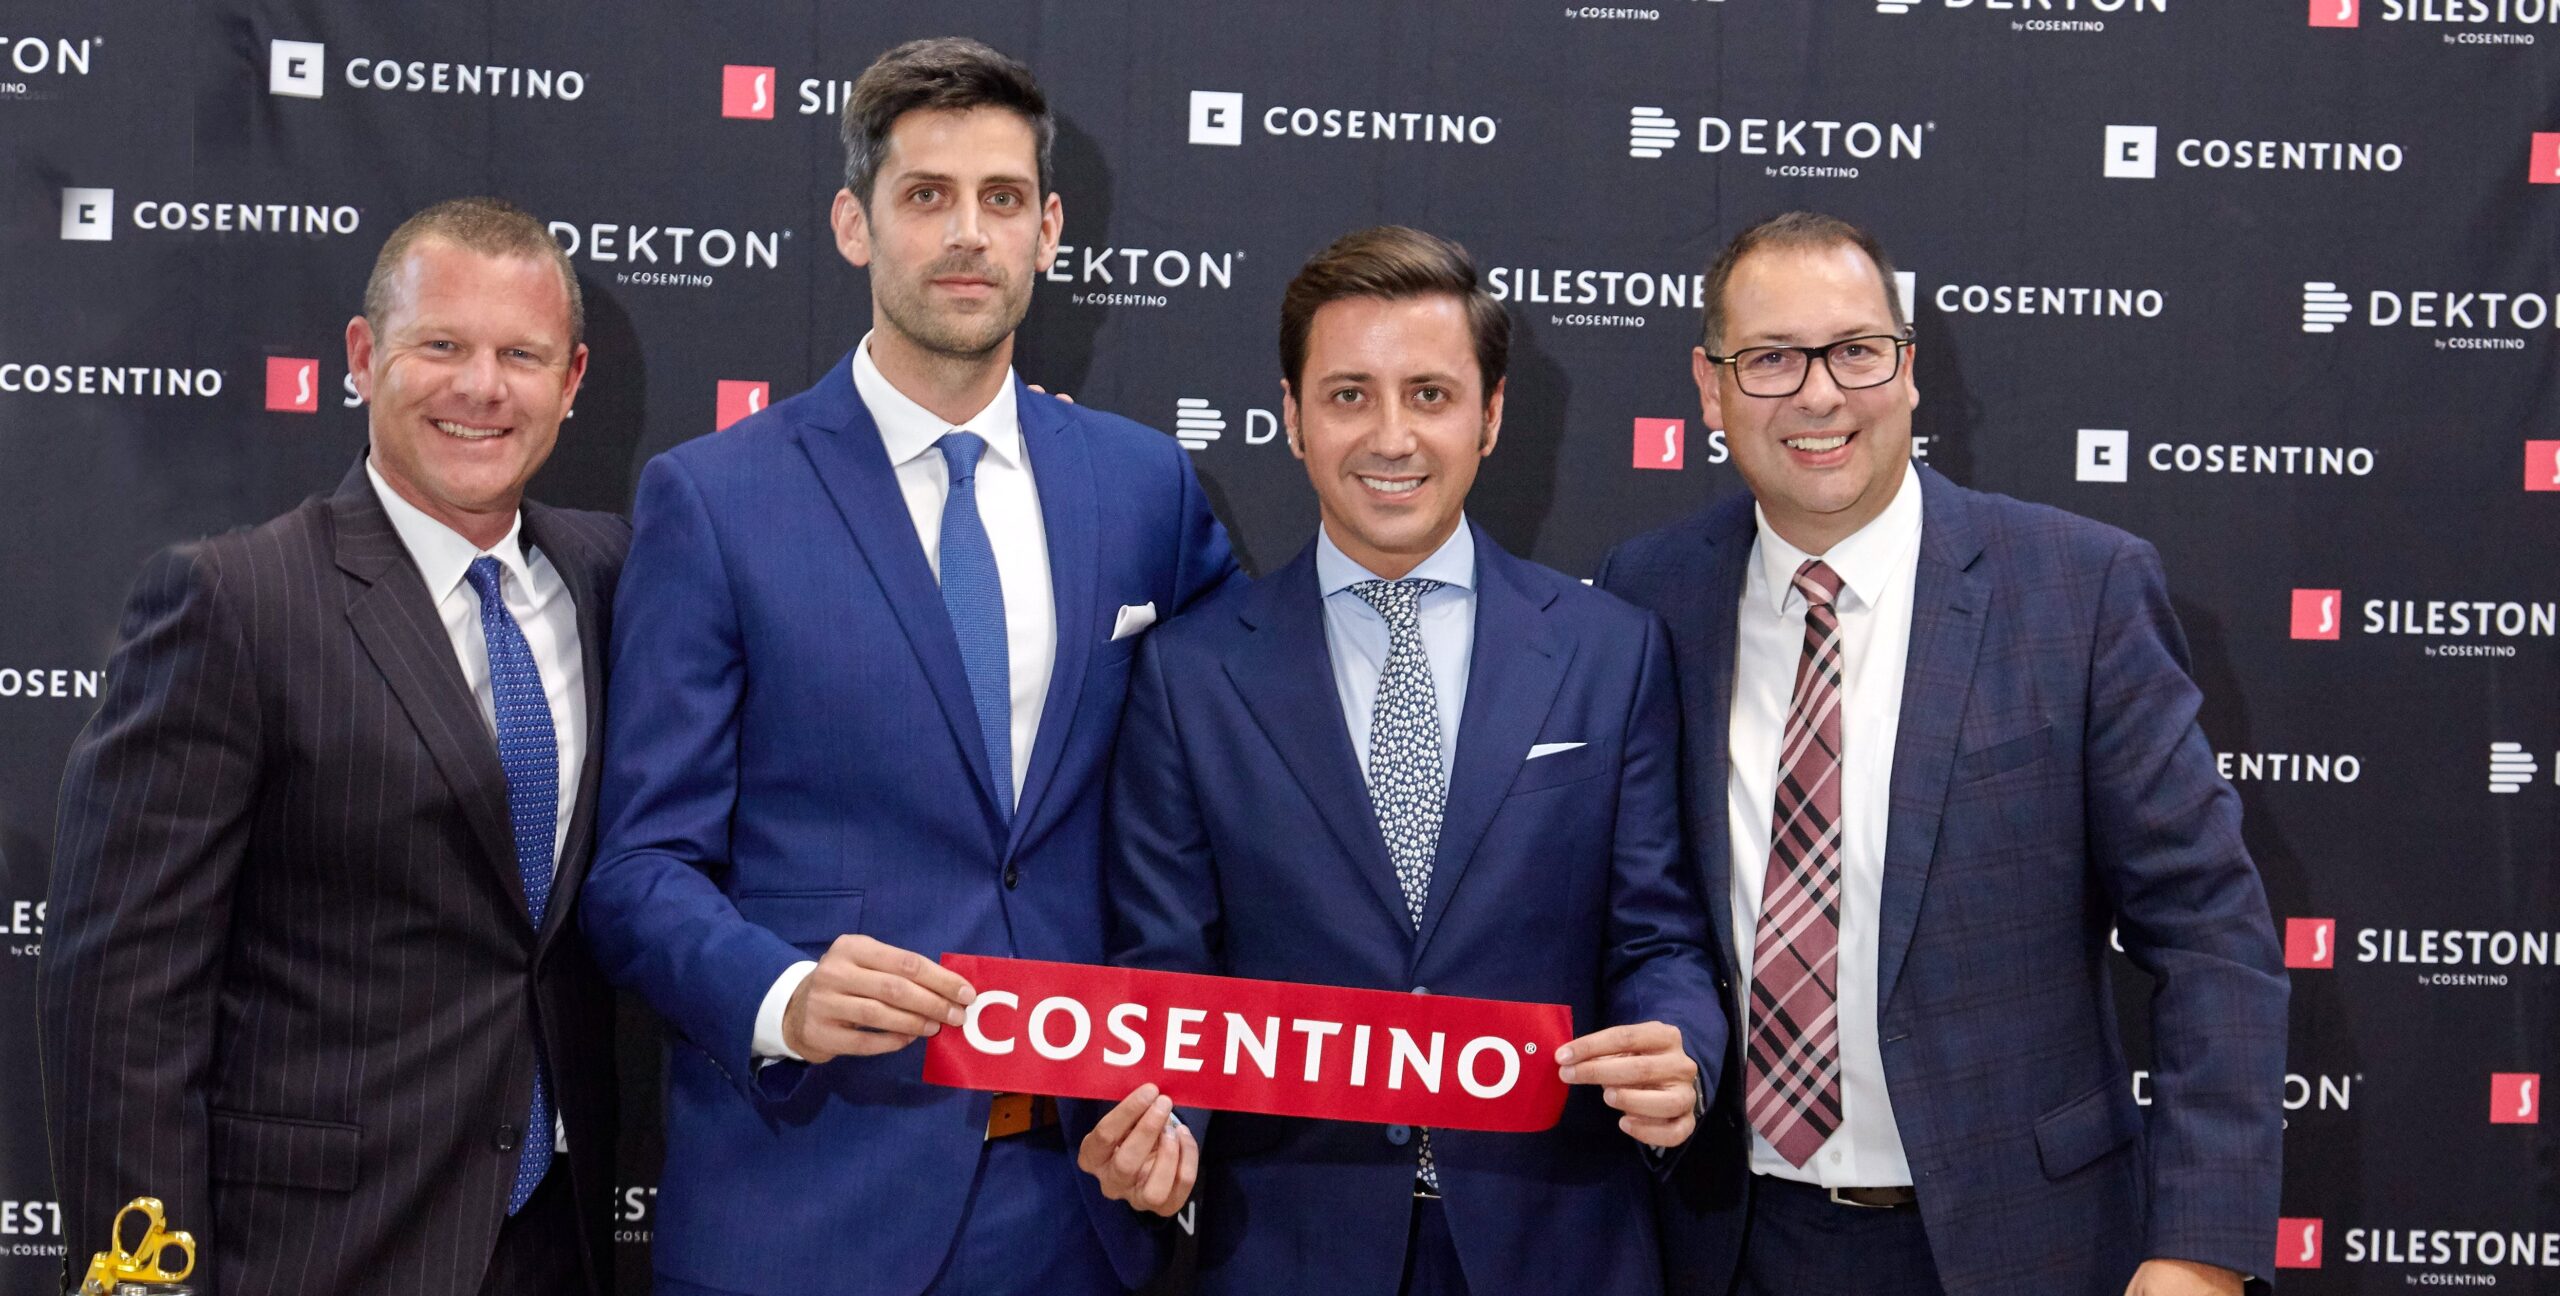 Image of MG 5732 1 e1536300961412 scaled in Cosentino Officially Opens New Vancouver Centre Showroom - Cosentino